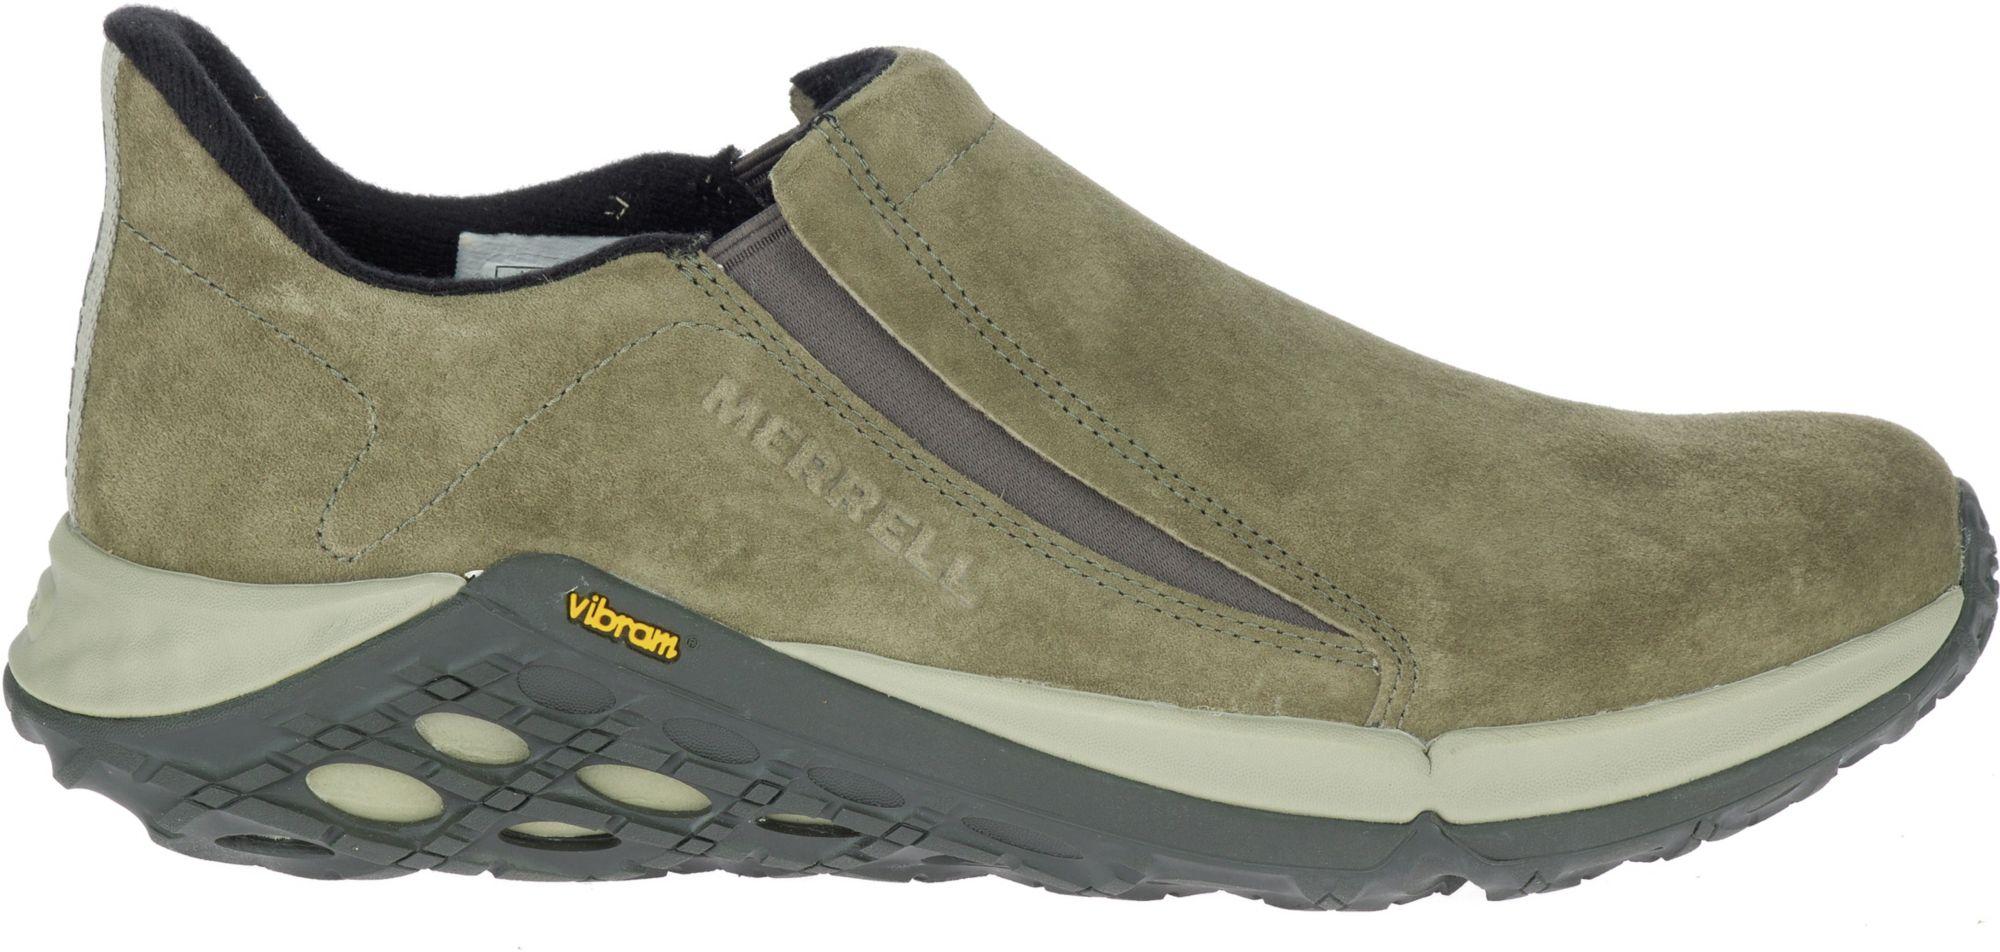 Merrell Suede Jungle Moc 2.0 in Dusty Olive (Green) for Men - Save 28% ...